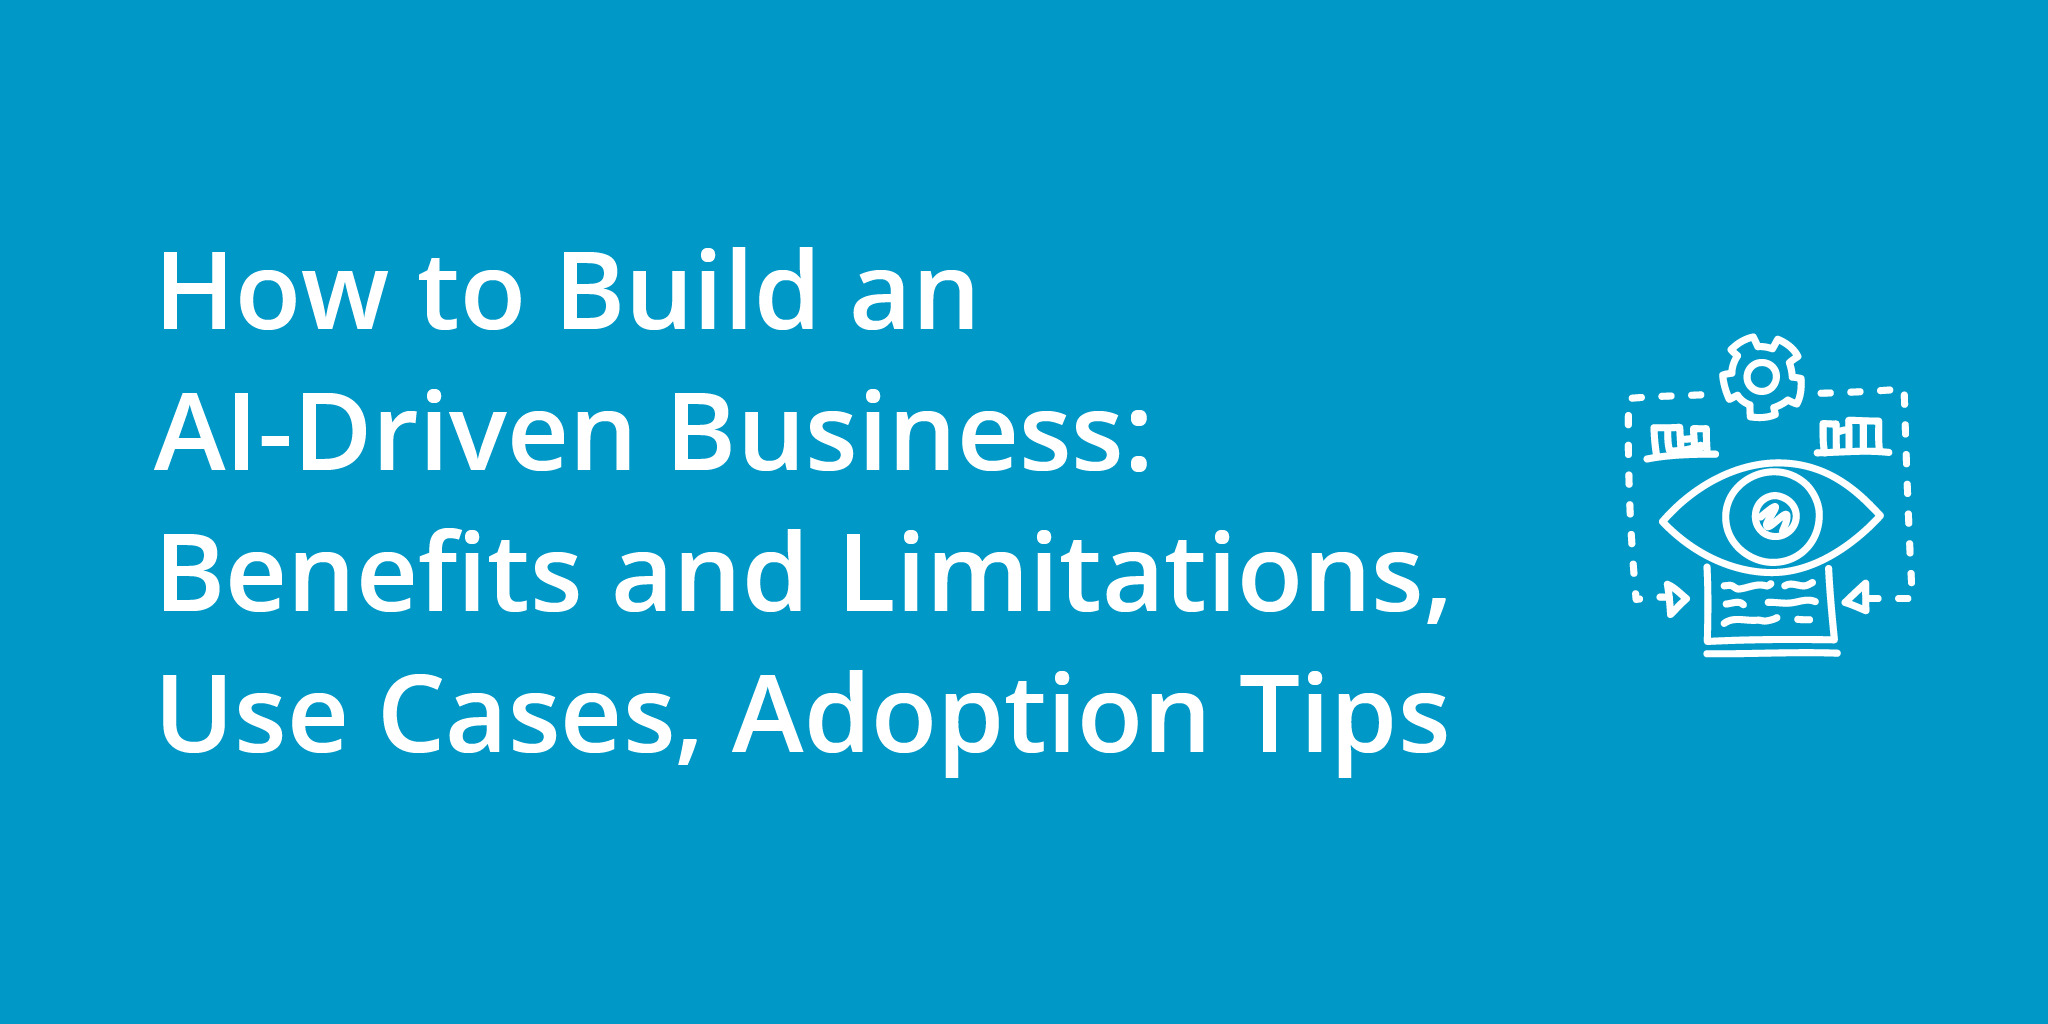 How to Build an AI-Driven Business: Benefits and Limitations, Use Cases, Adoption Tips  | Telephones for business